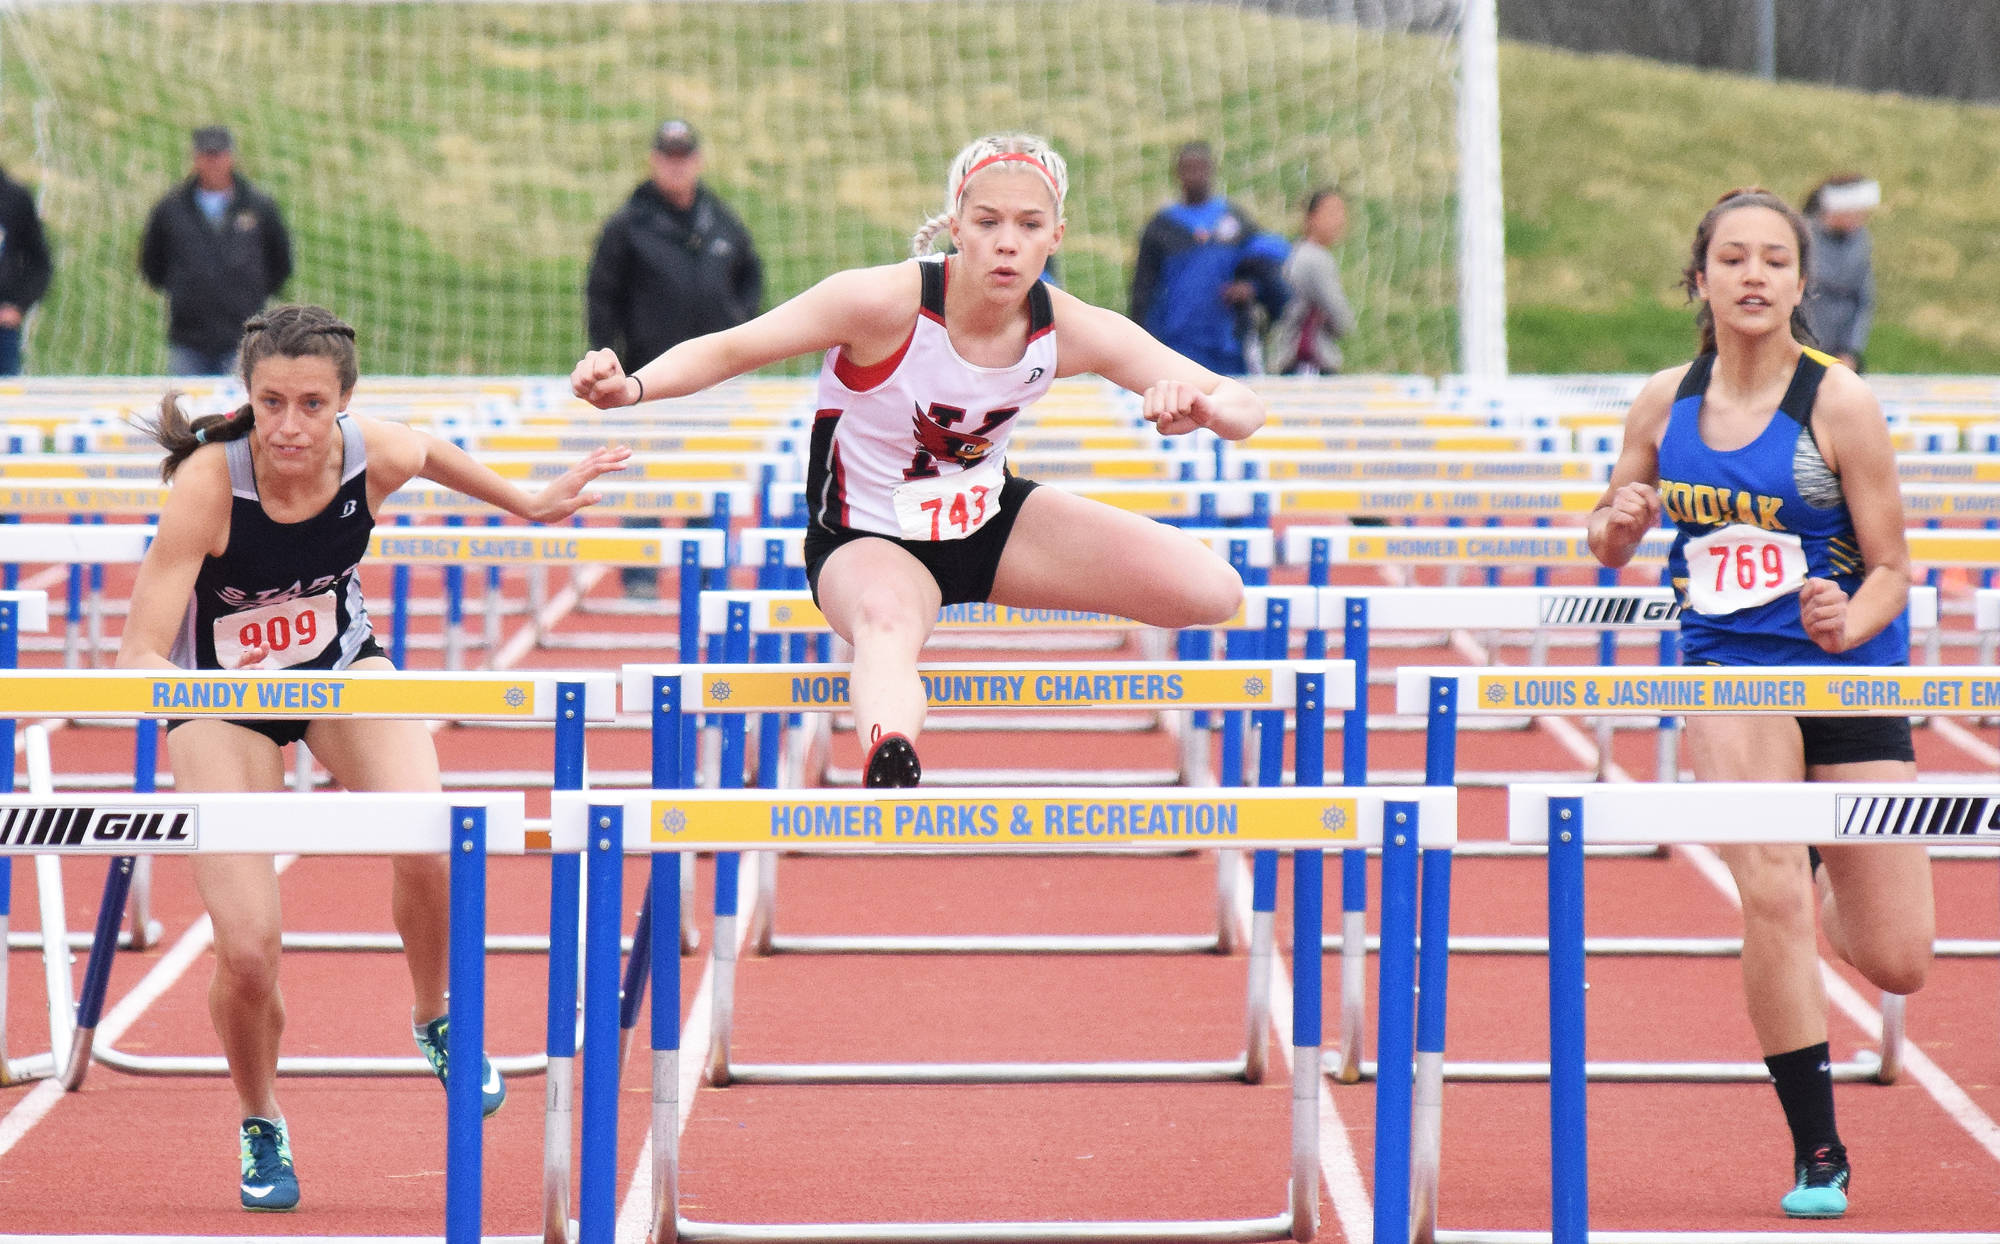 Kenai Central’s Katie Kilfoyle leads the field in the Class 4A girls 100-meter hurdles final Saturday at the Region III track & field championships in Homer. (Photo by Joey Klecka/Peninsula Clarion)